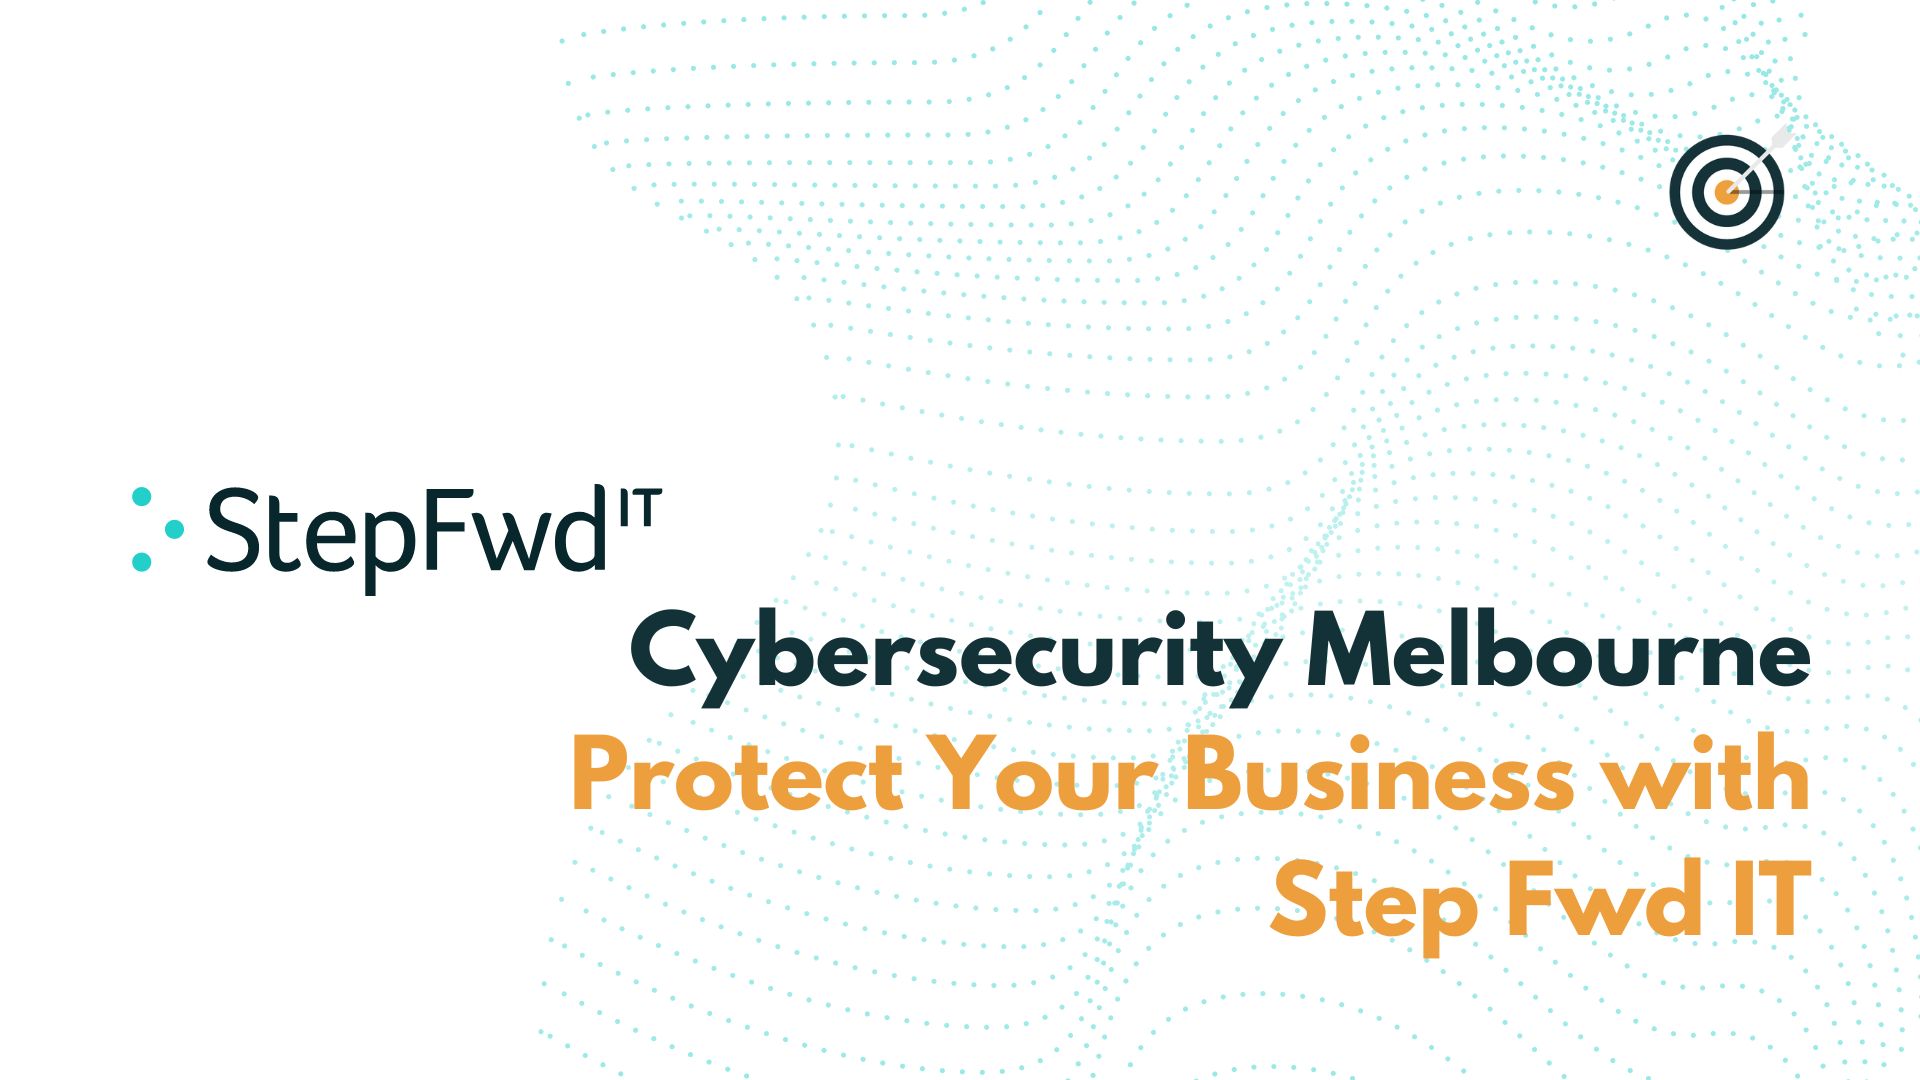 Cybersecurity Melbourne: Protect Your Business with Step Fwd IT